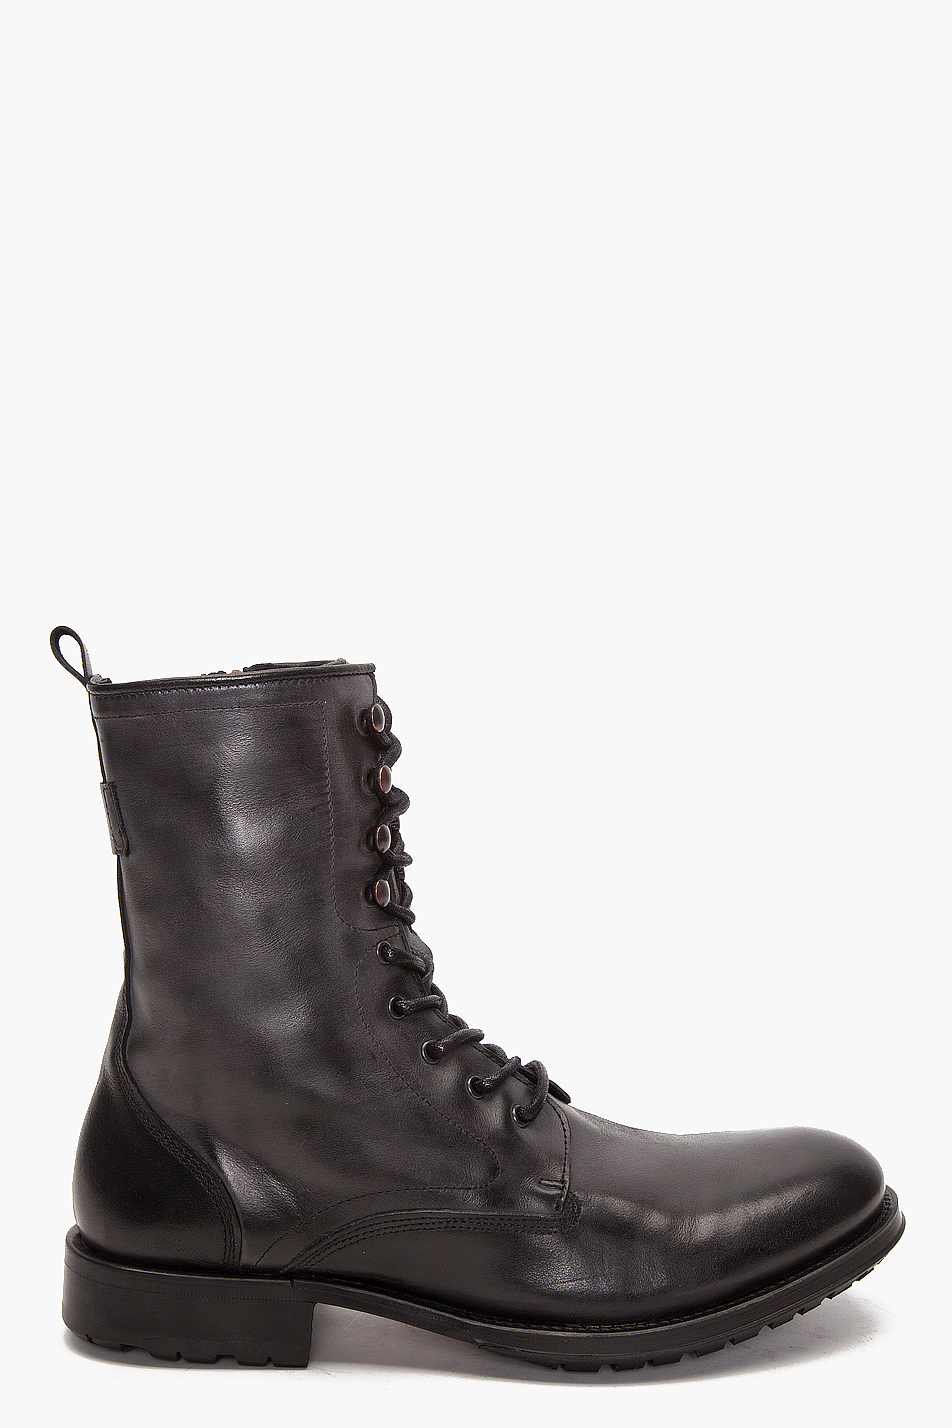 H by Hudson Westland Boots in Black for Men - Lyst